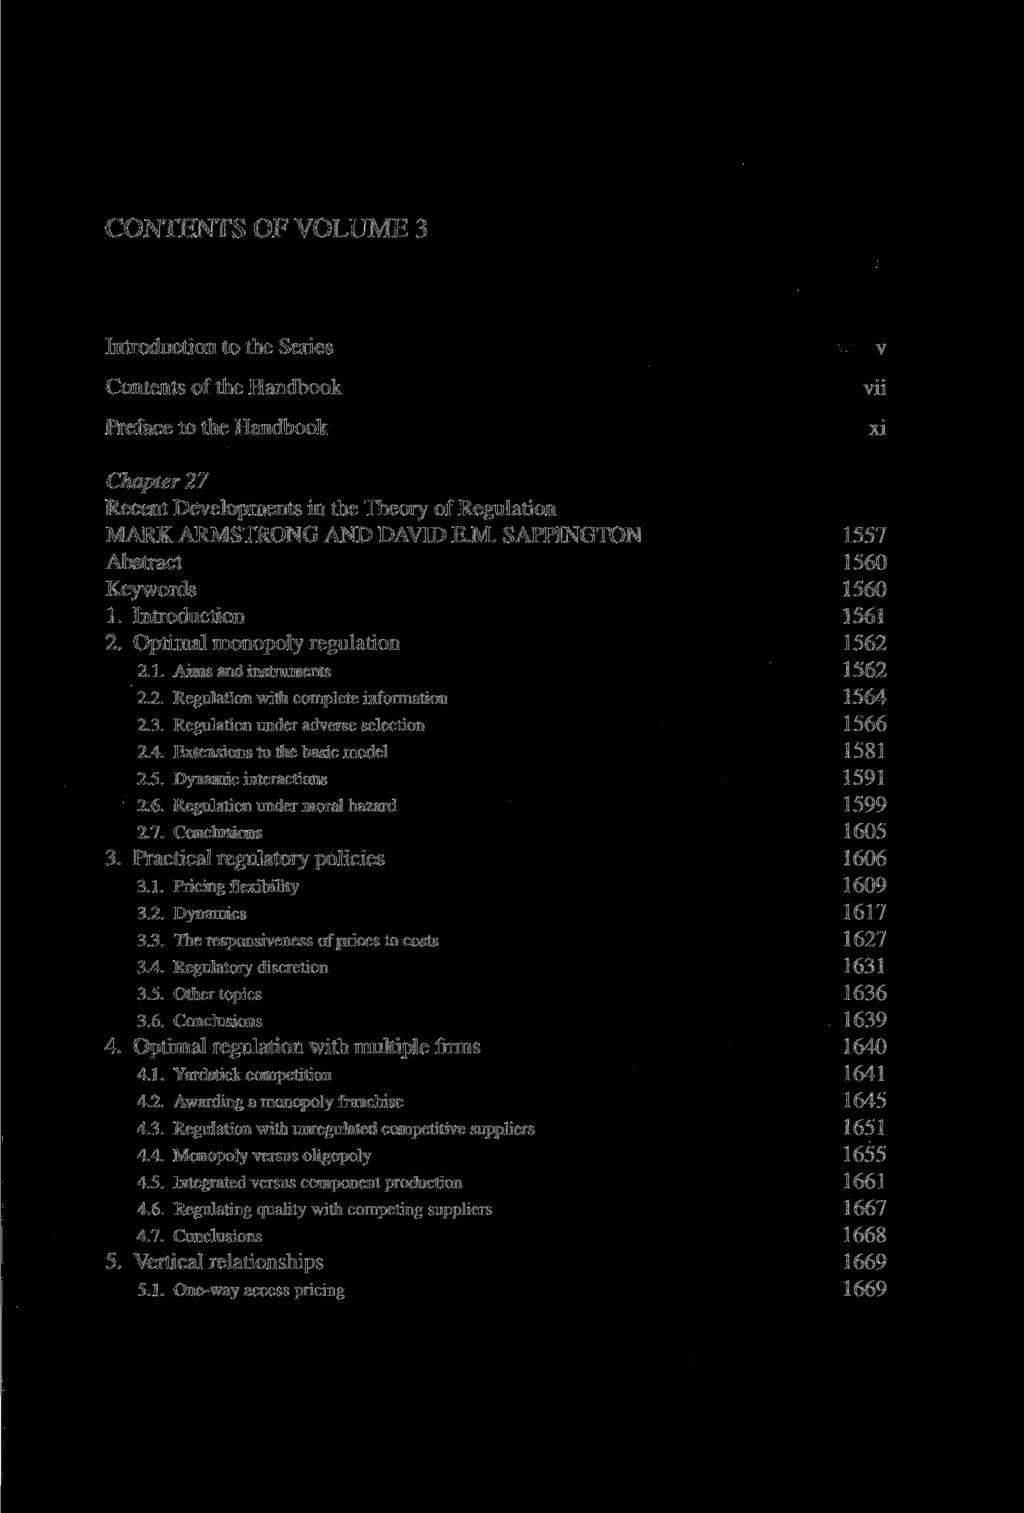 CONTENTS OF VOLUME 3 Introduction to the Series Contents of the Handbook Preface to the Handbook v vii xi Chapter 27 Recent Developments in the Theory of Regulation MARK ARMSTRONG AND DAVID E.M. SAPPINGTON 1557 Abstract 1560 Keywords 1560 1.